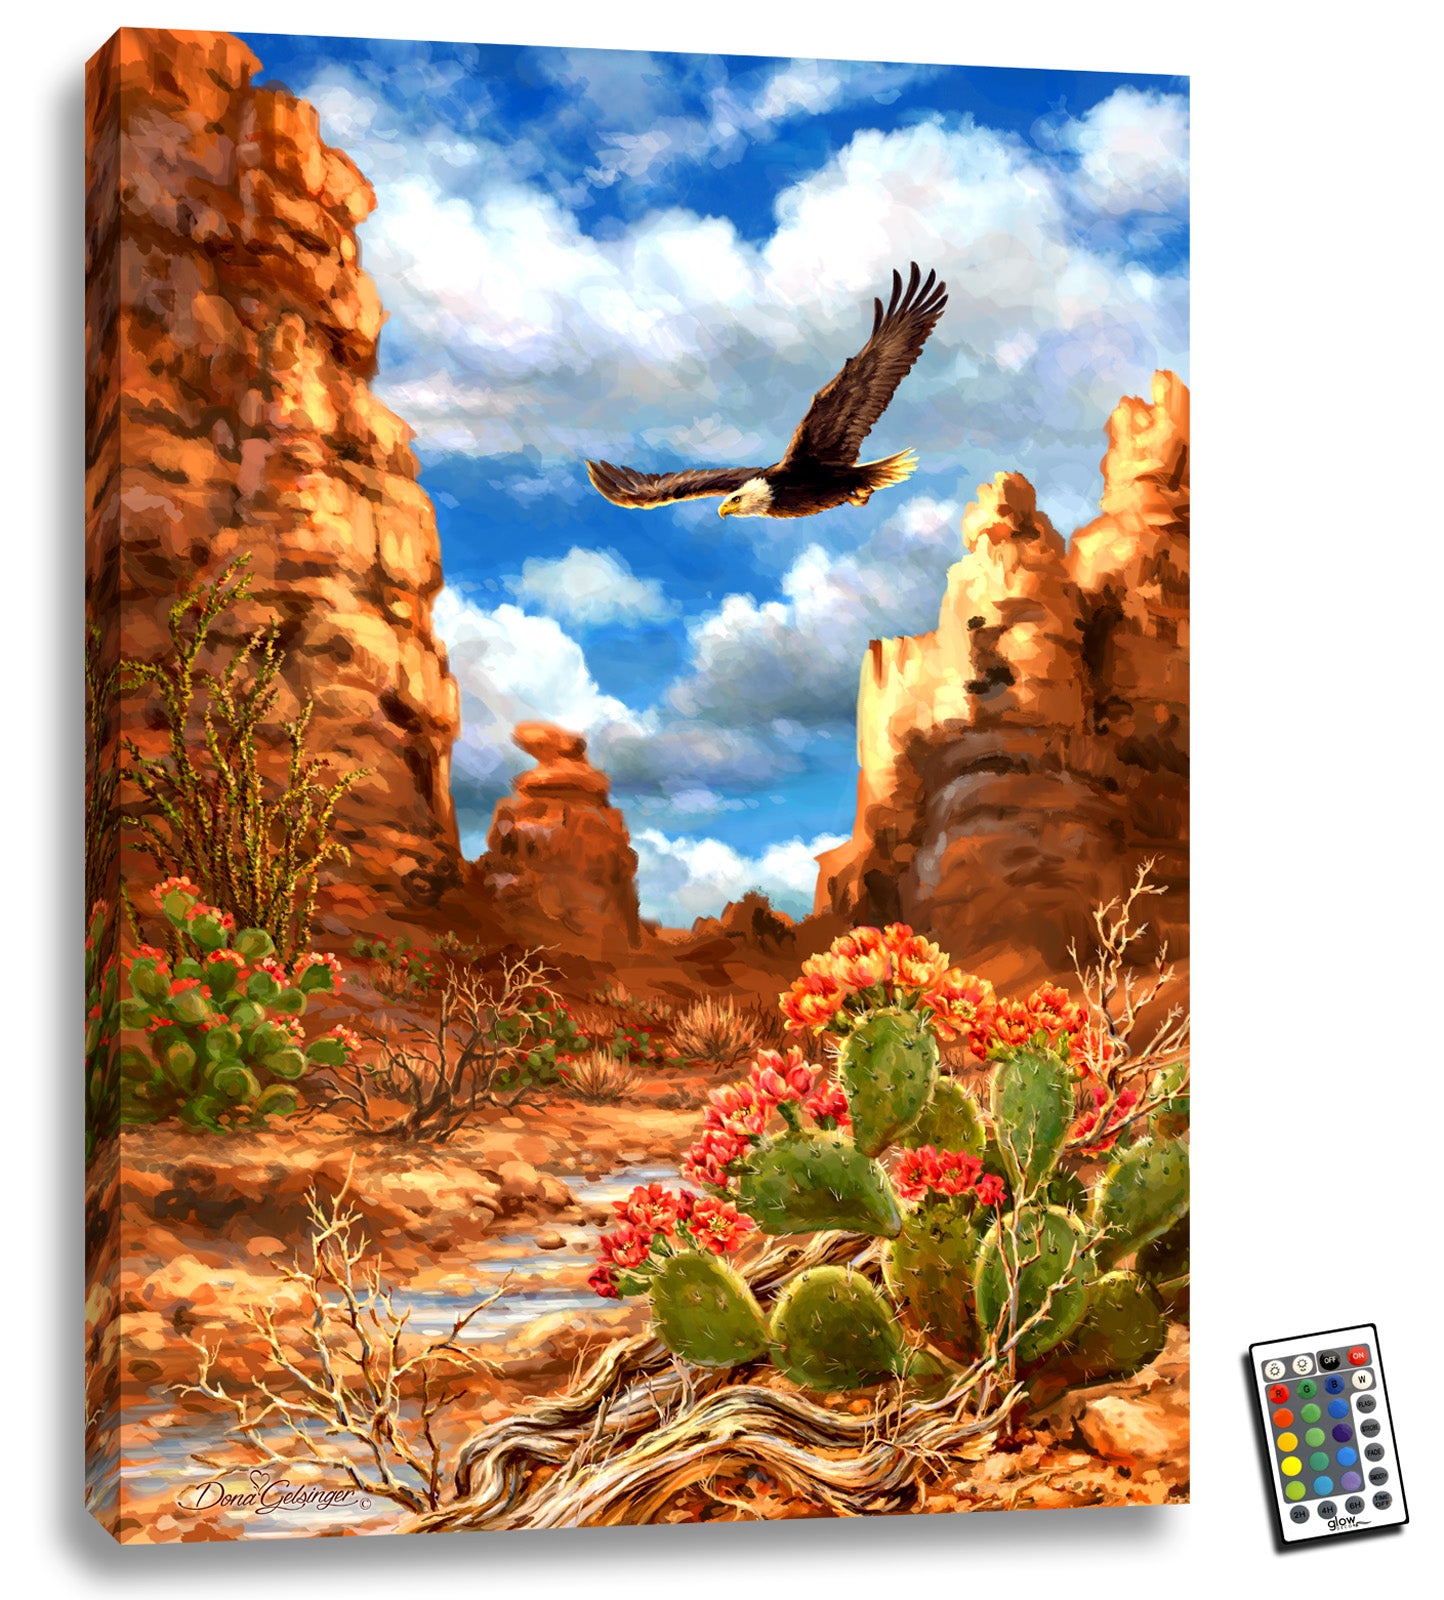  This stunning piece features a captivating scene of a blooming cactus stand set against a majestic canyon of plateaus. As you gaze upon this mesmerizing landscape, you'll feel transported to the heart of the desert, surrounded by the raw, rugged beauty of nature.  But that's not all - as you take in the scene, a magnificent bald eagle soars through the canyon